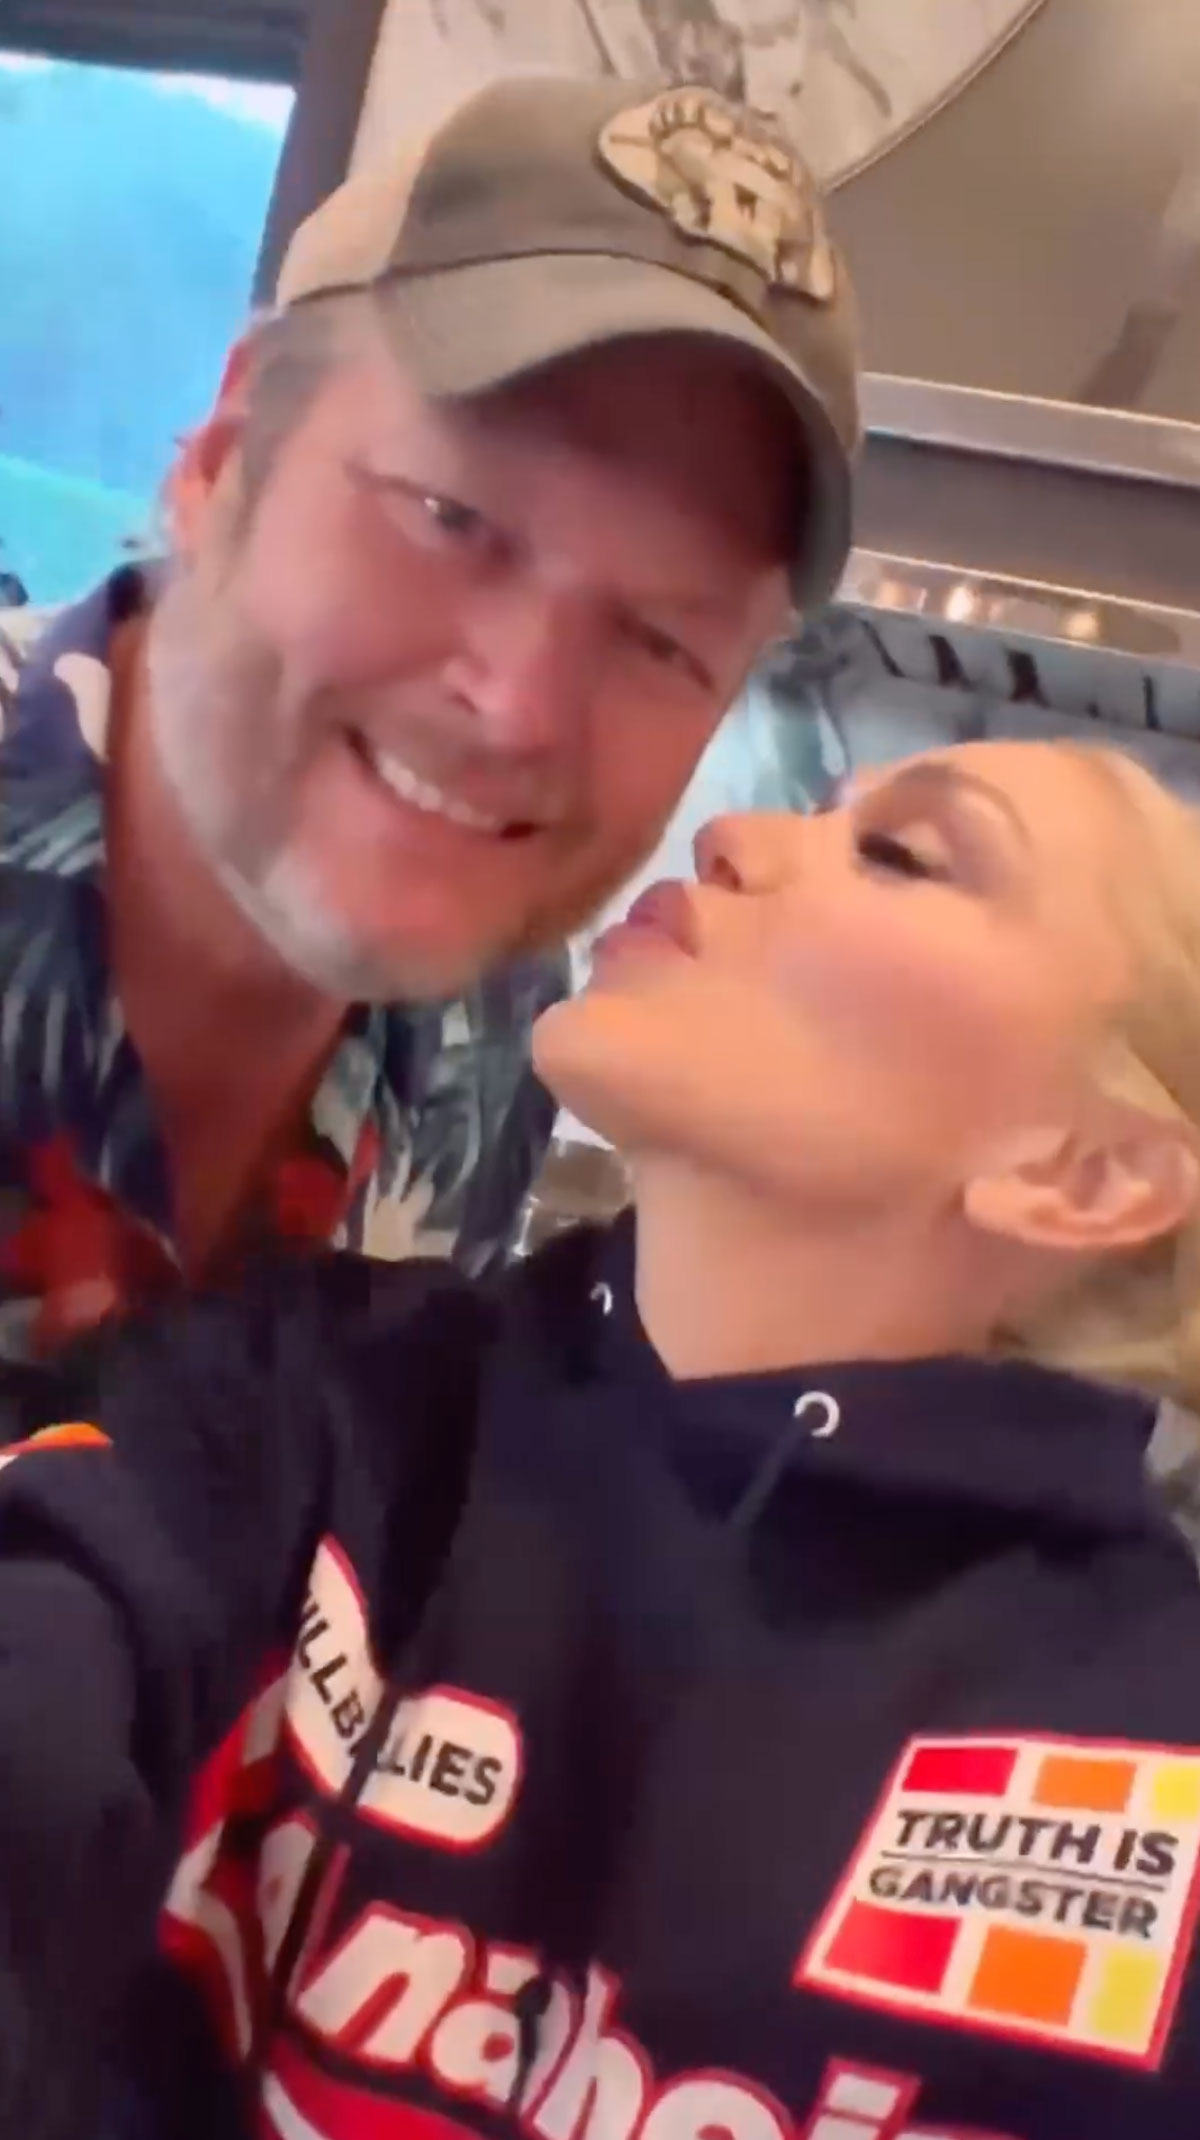 Blake Shelton is the stepdad to Gwen Stefani's three kids whom she shares with her ex Gavin Rossdale